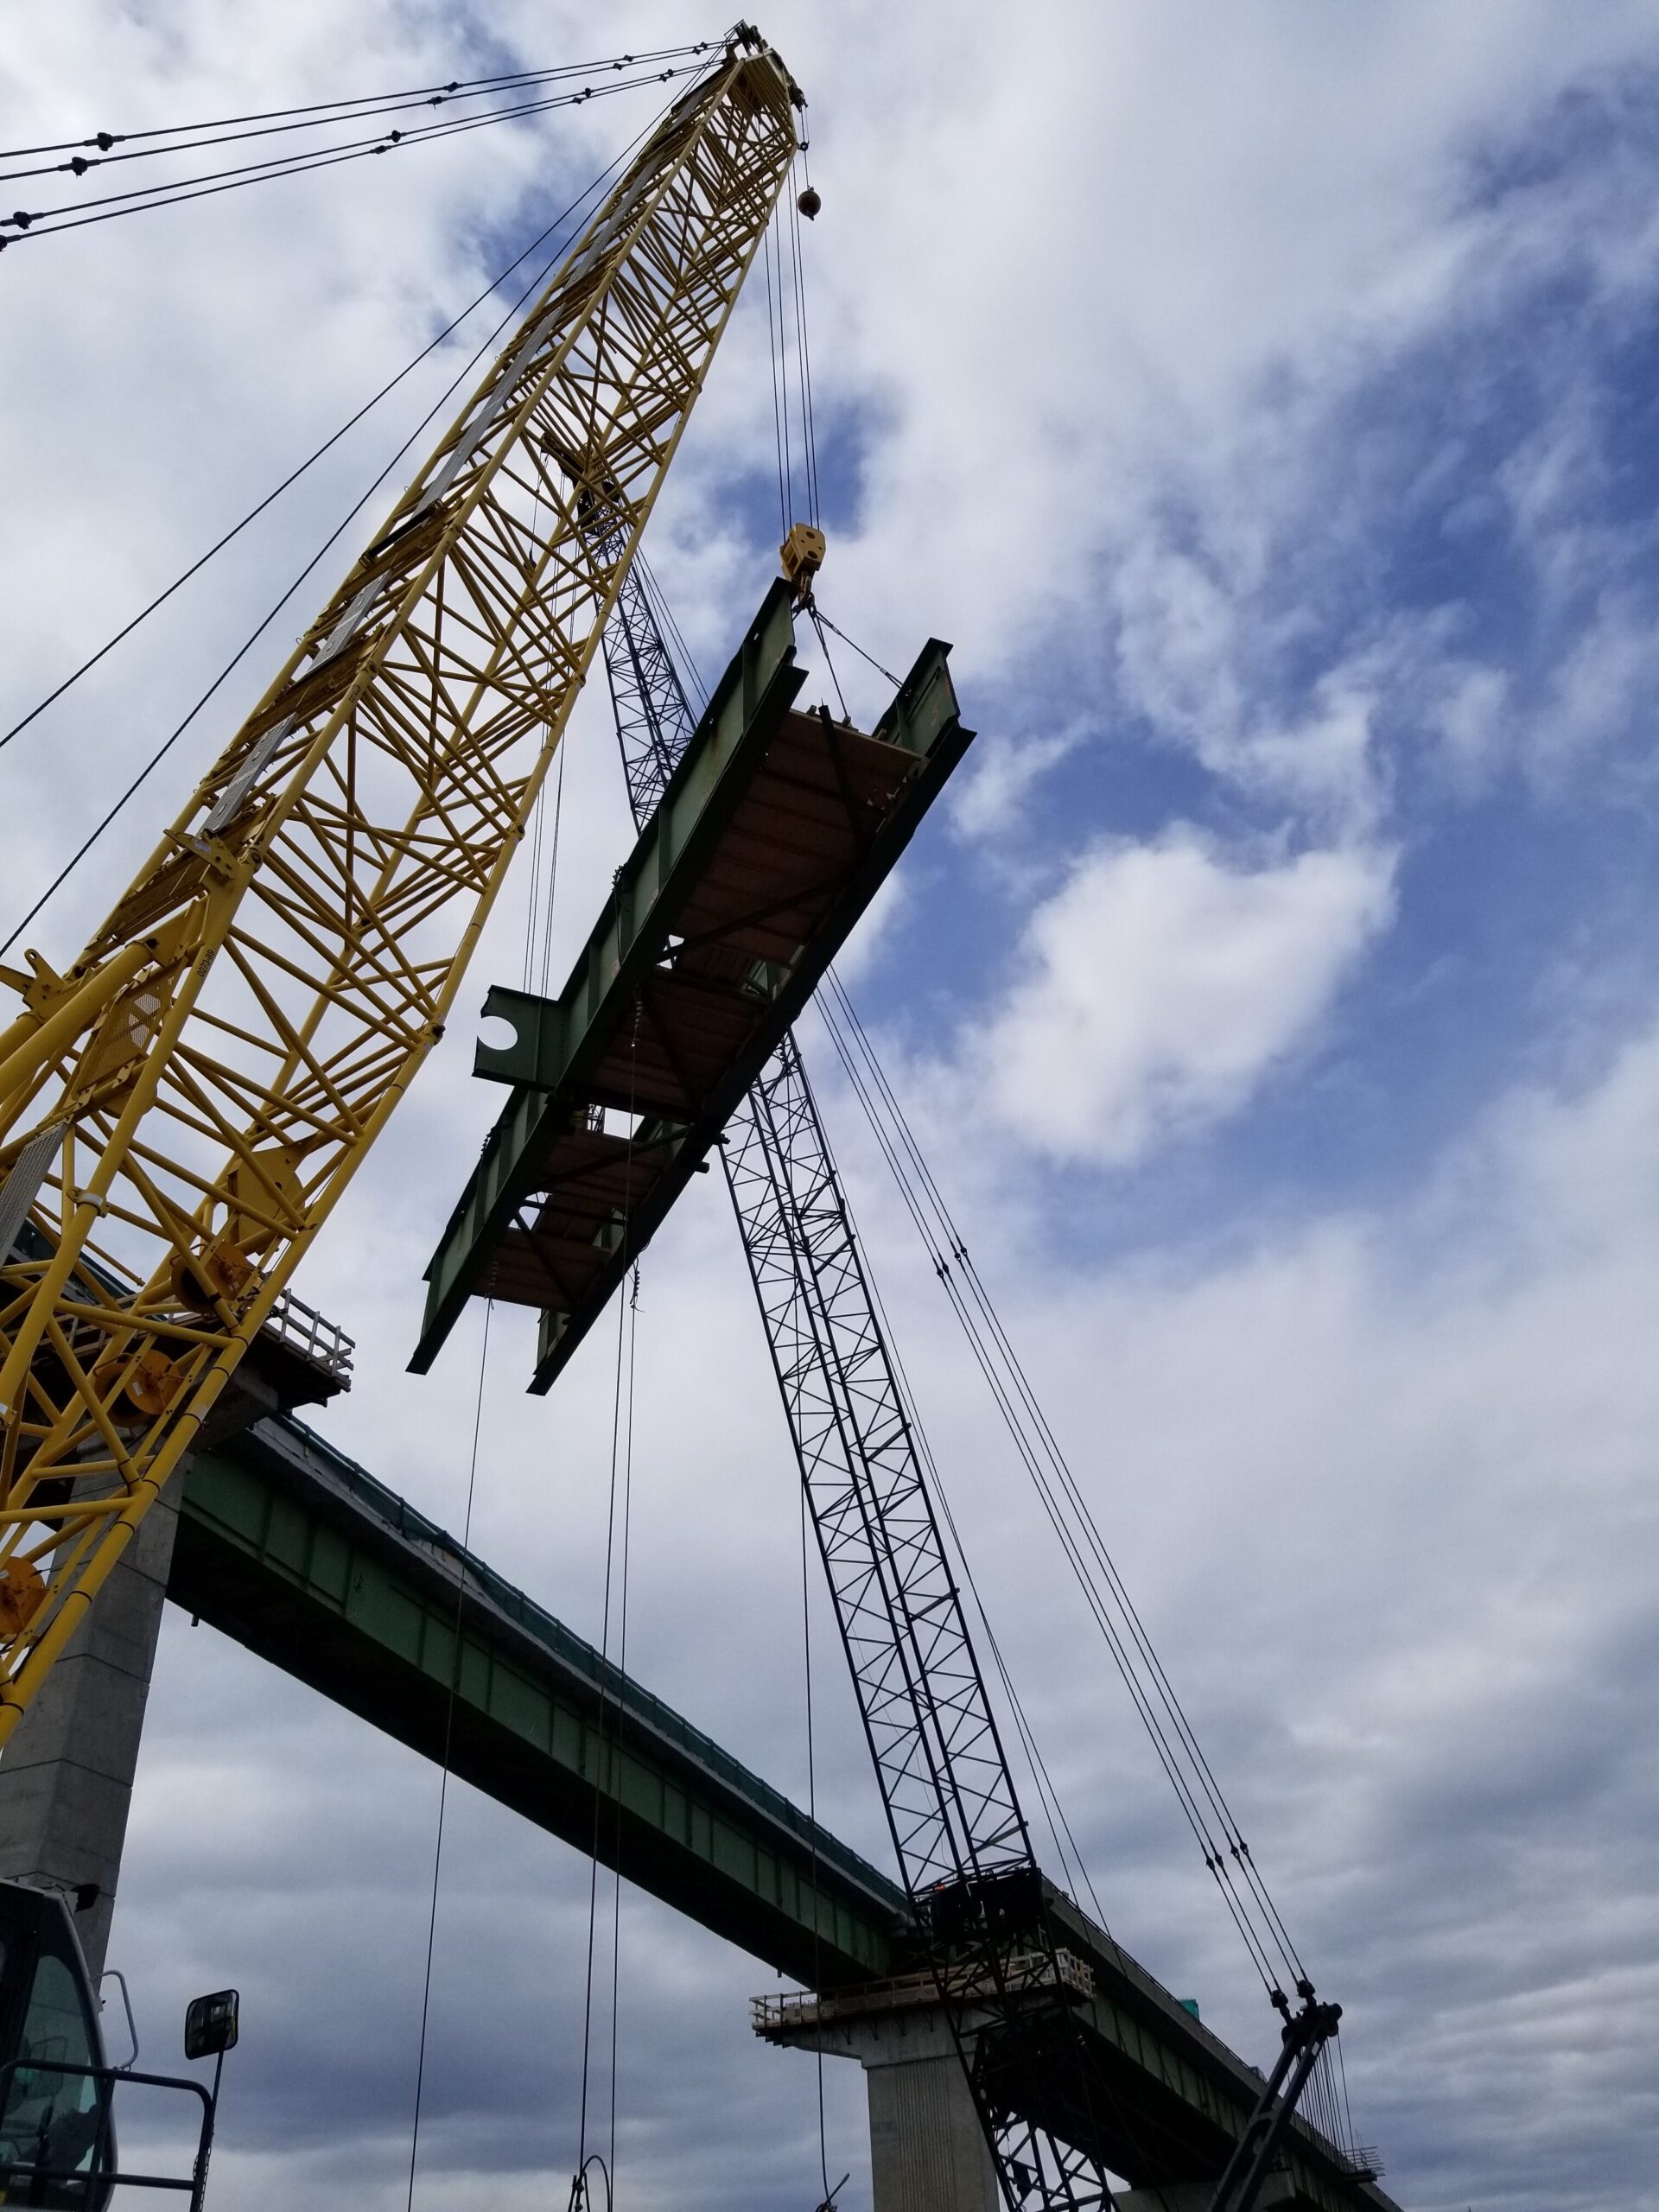 Final section of girder being lowered